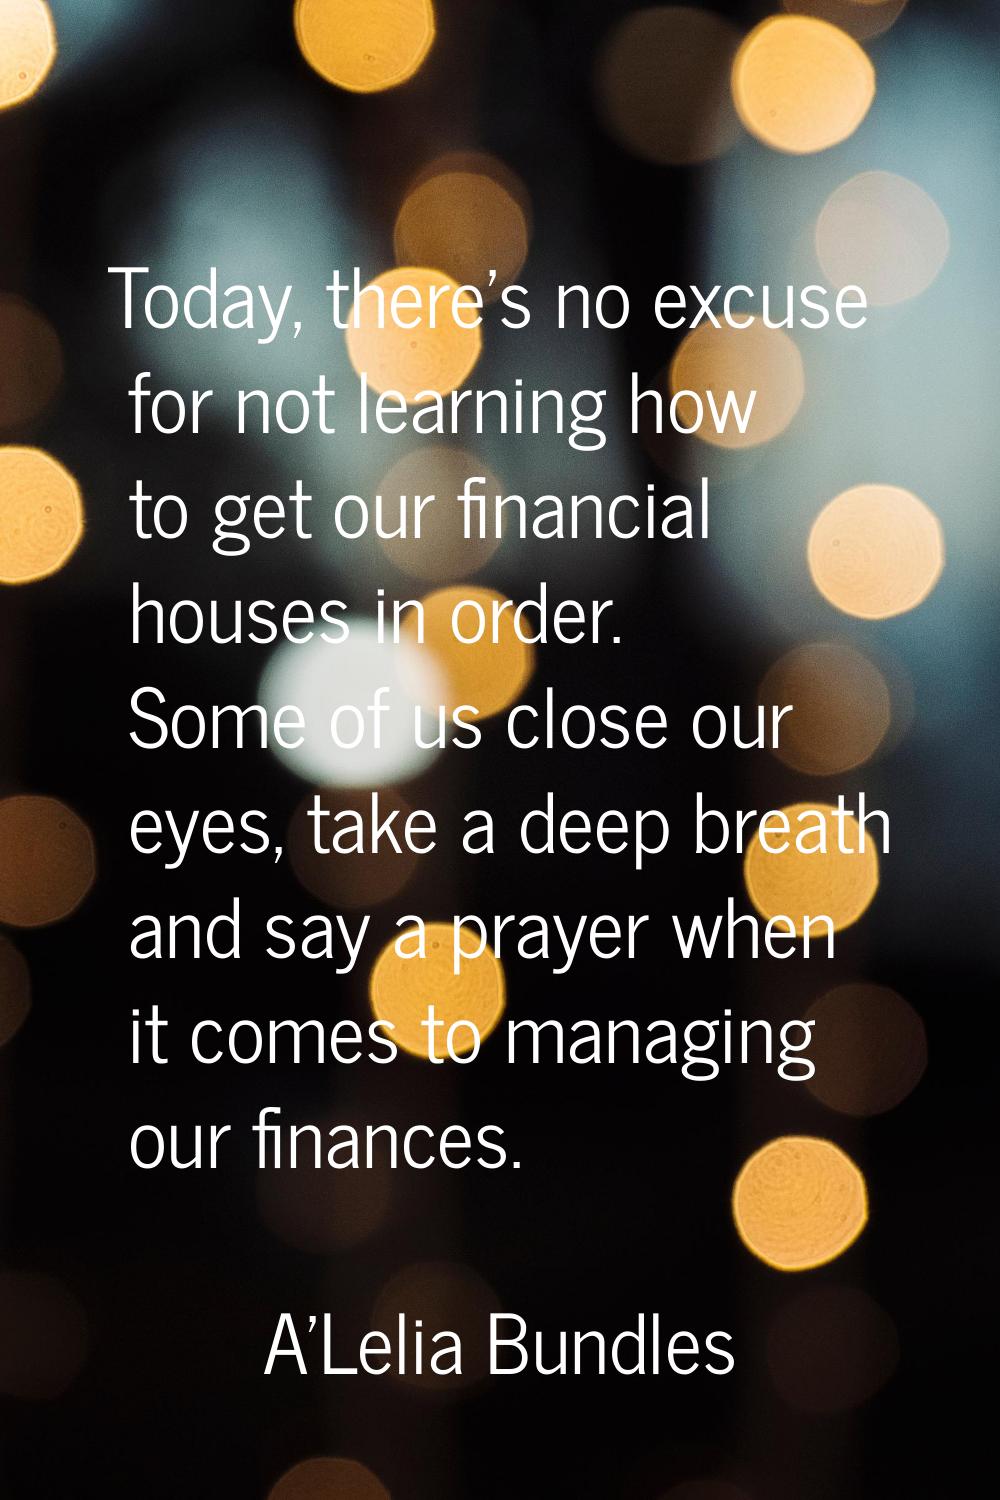 Today, there's no excuse for not learning how to get our financial houses in order. Some of us clos